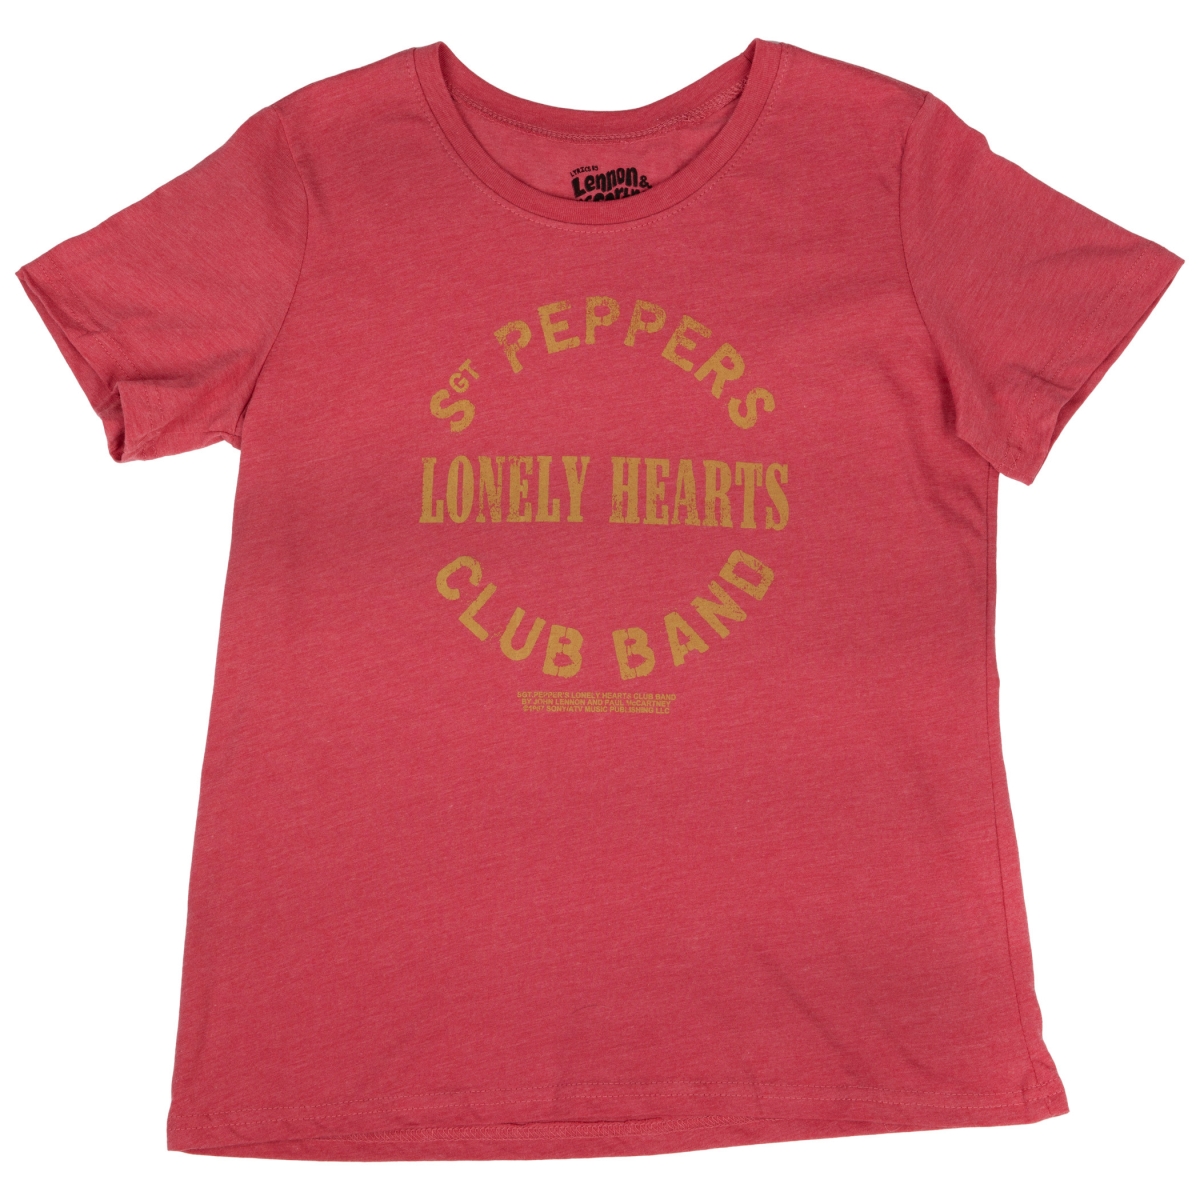 845641-small The  SGT Peppers Lonely Hearts Club Band Juniors T-Shirt - Small -  Beatles